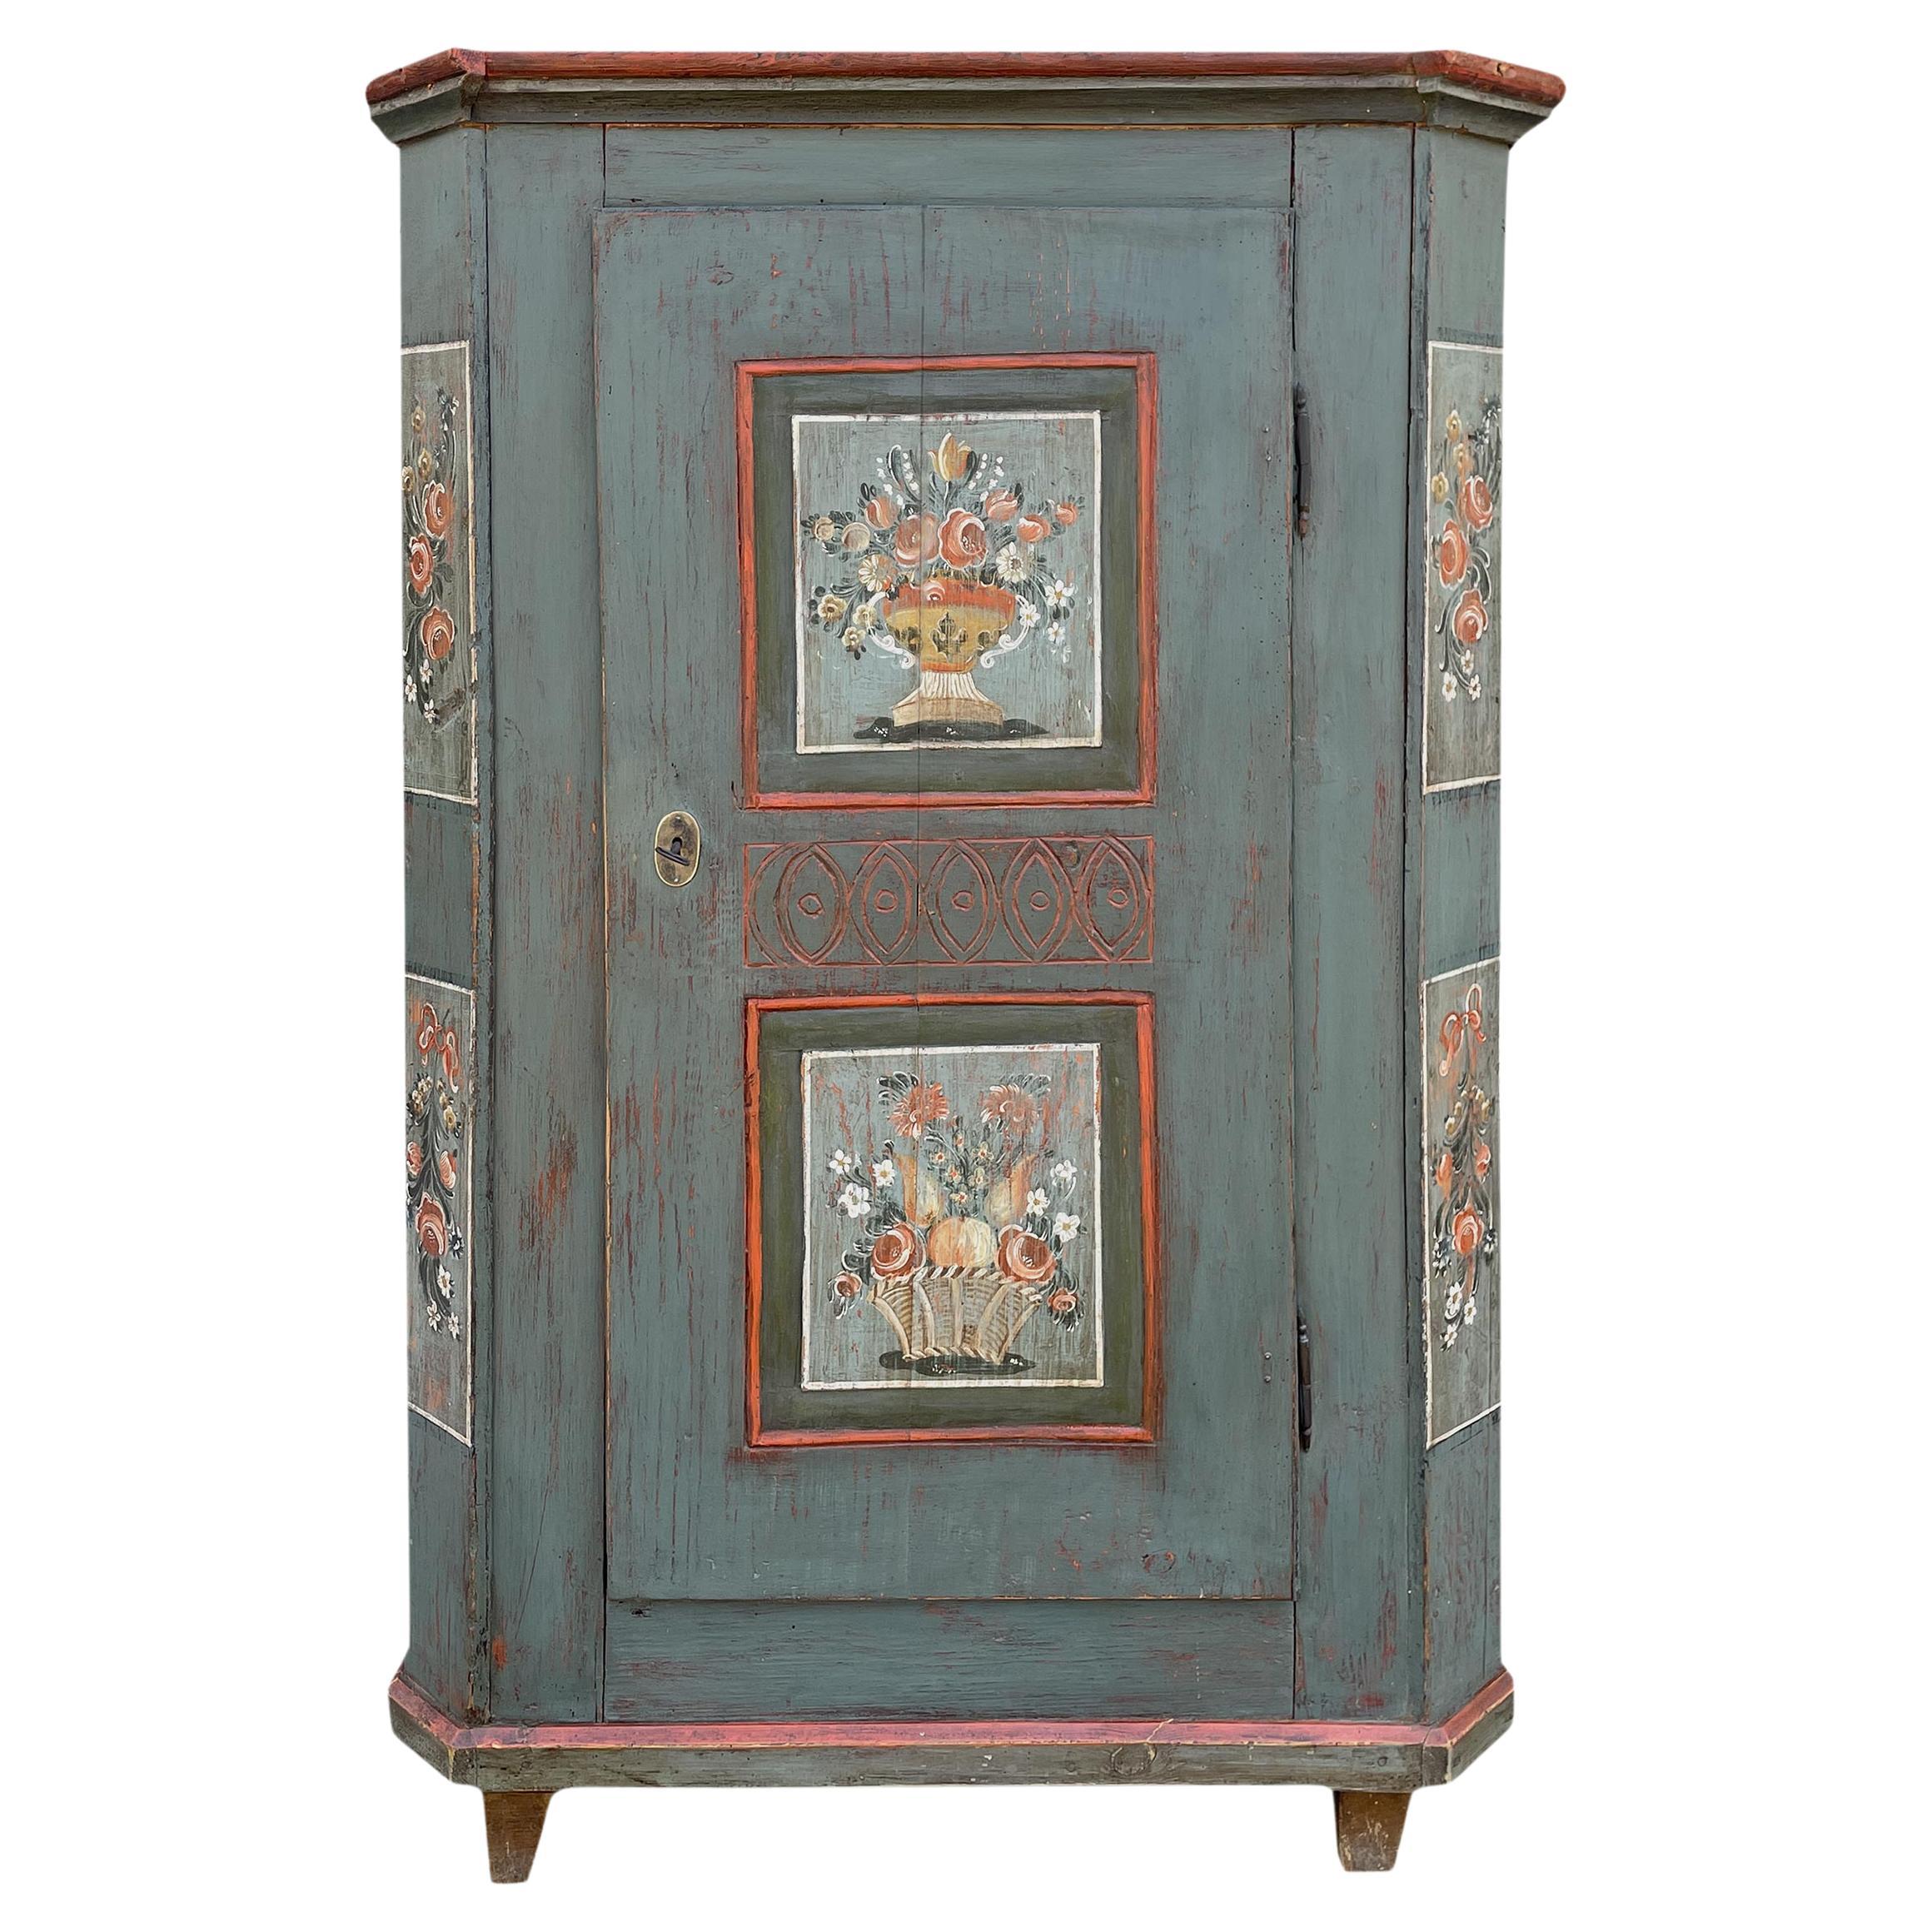 1810s Painted Furniture